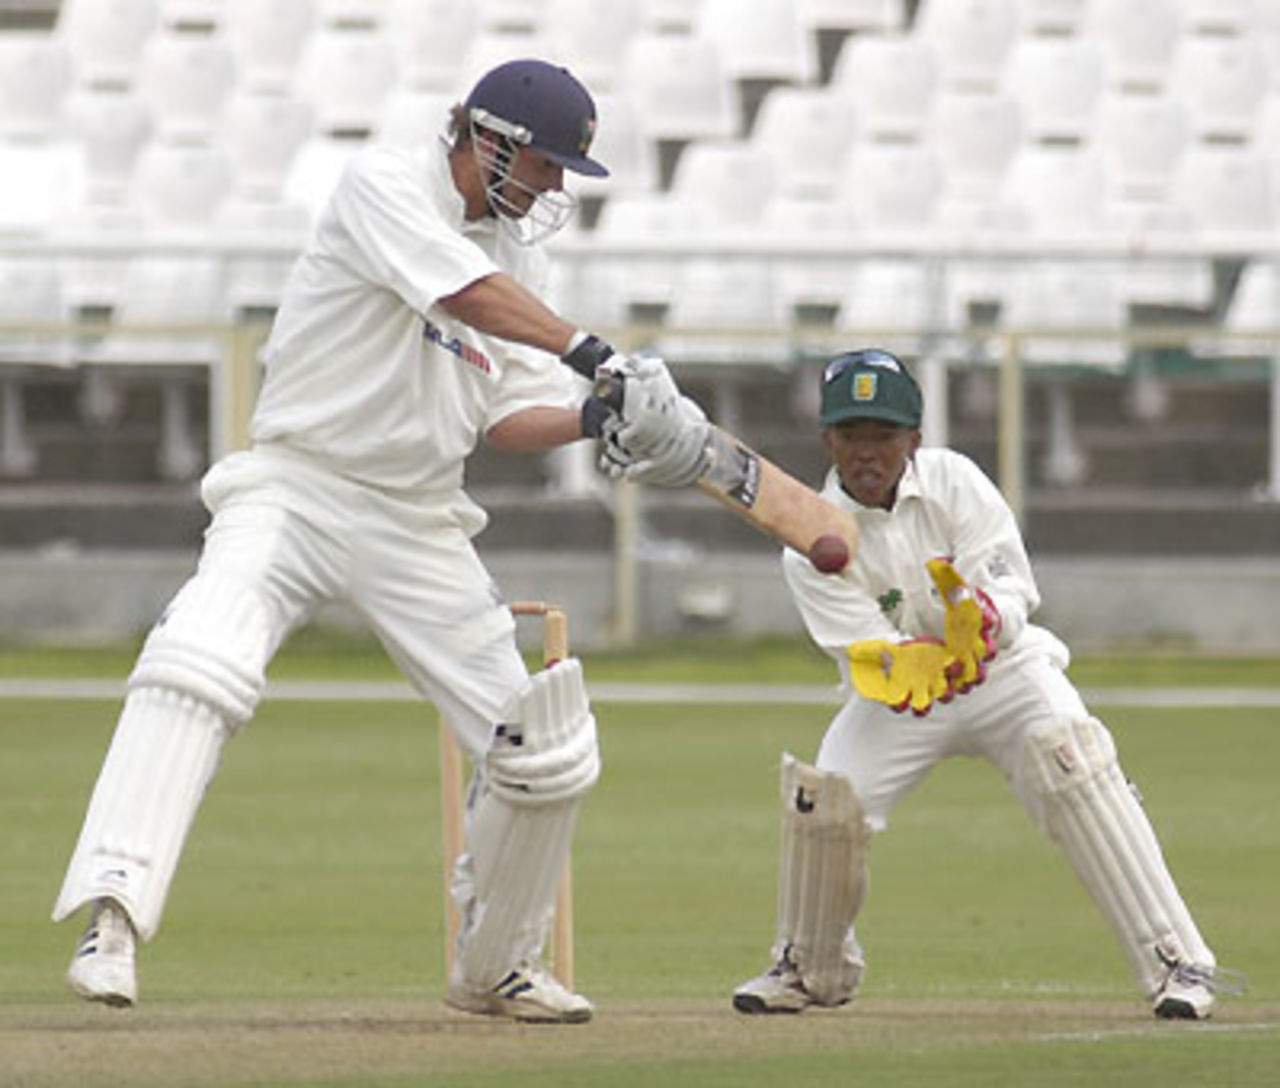 Andrew Puttick cuts a ball against North West at Newlands on Friday